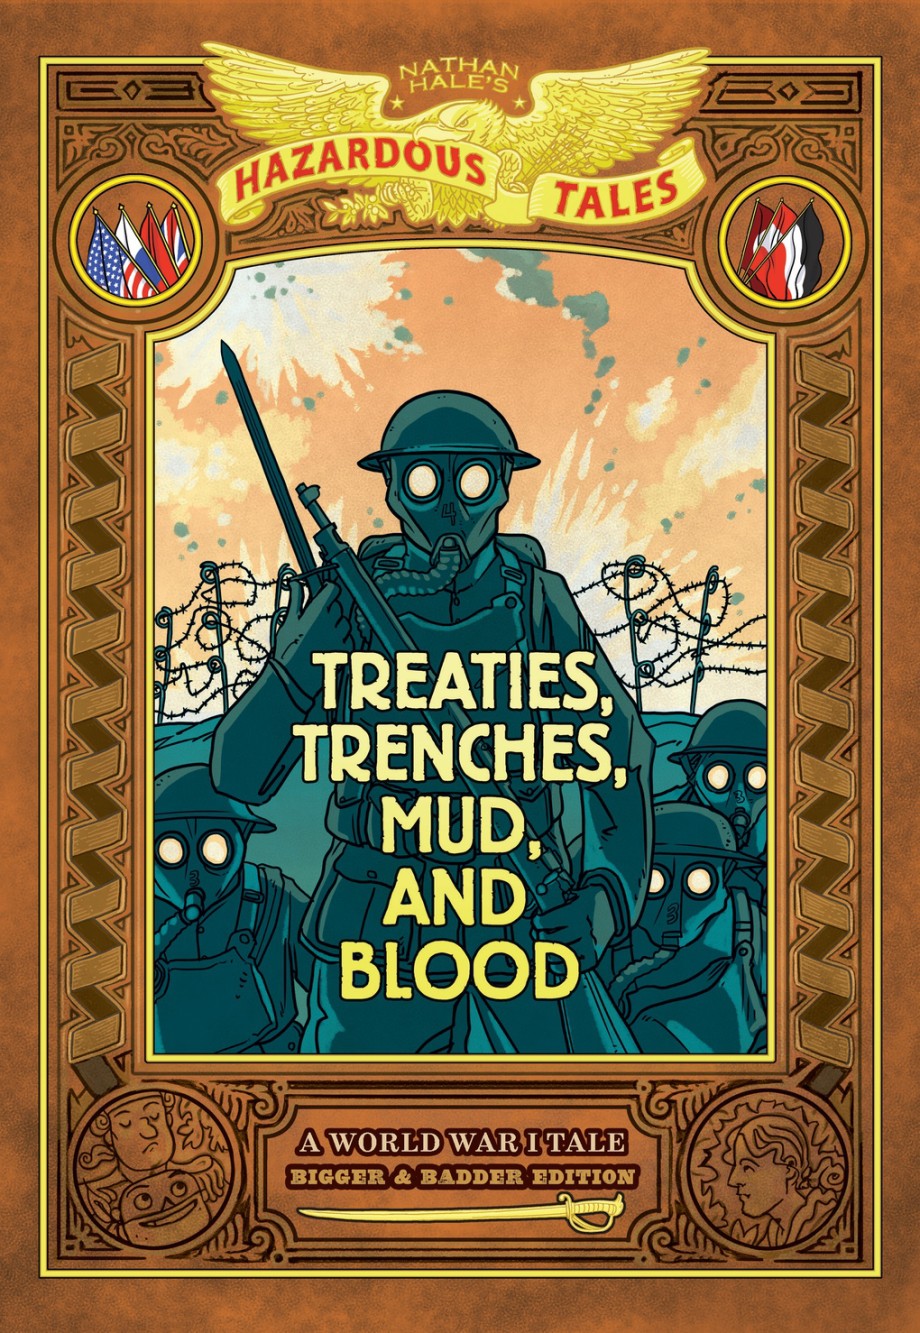 Treaties, Trenches, Mud, and Blood: Bigger & Badder Edition (Nathan Hale's Hazardous Tales #4) A World War I Tale (A Graphic Novel)